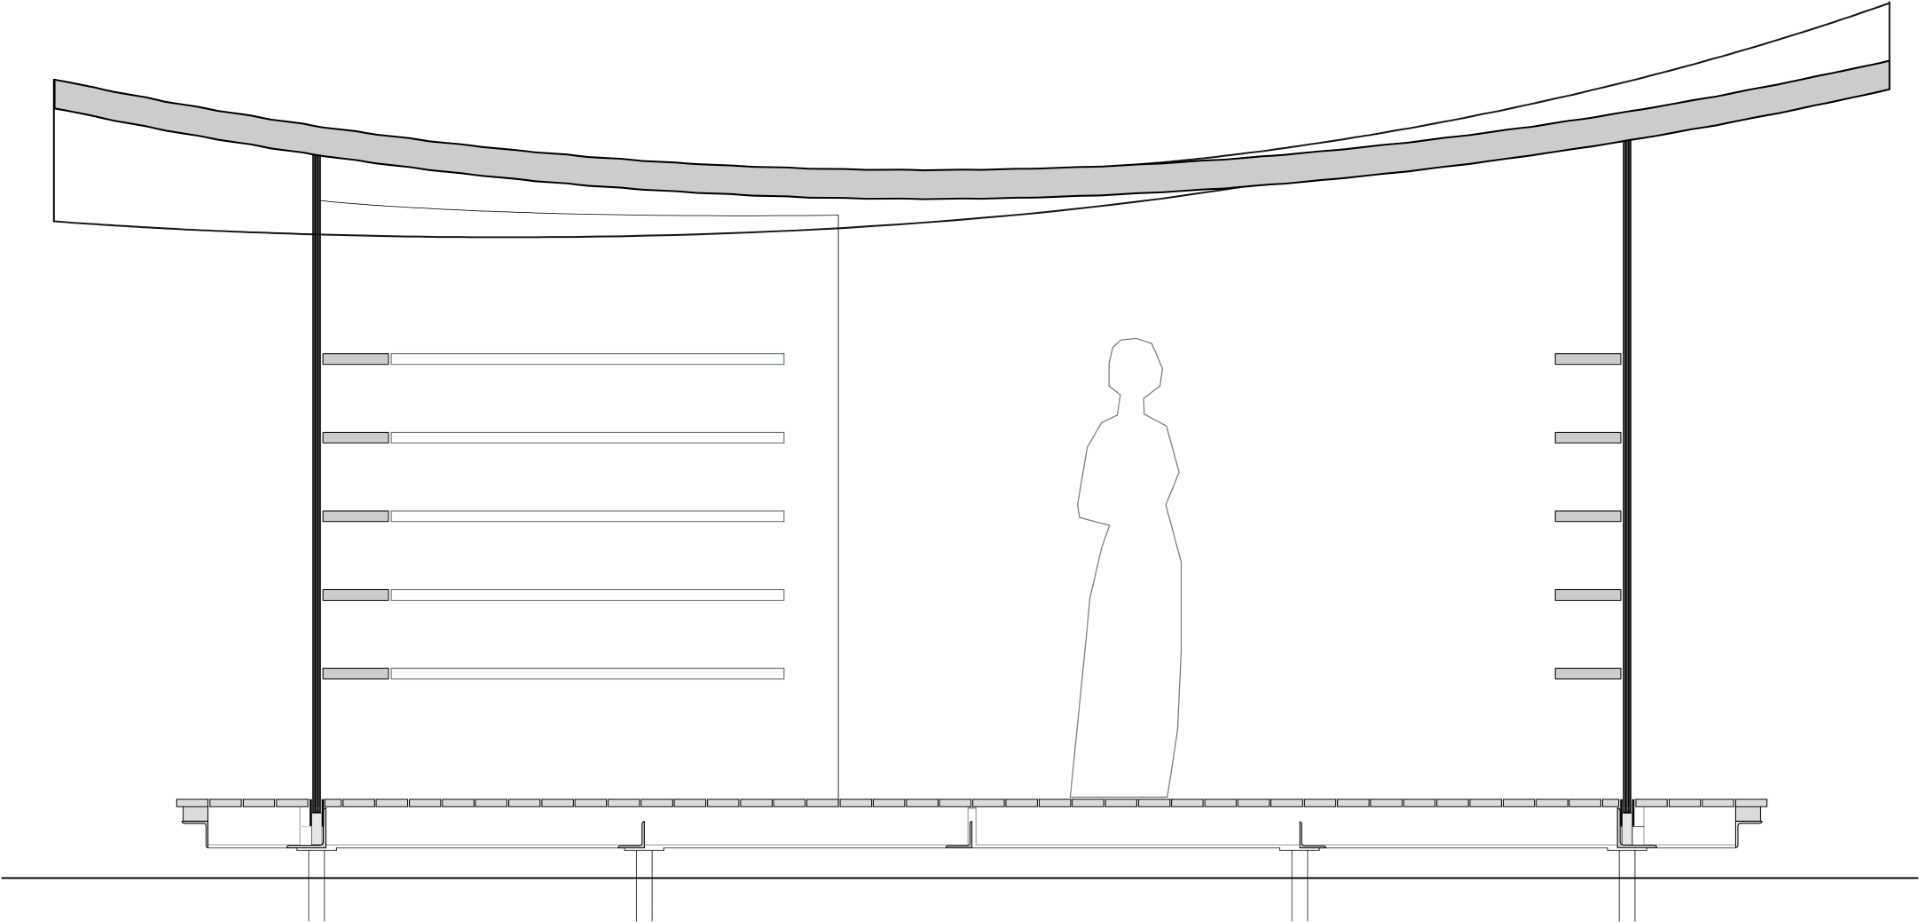 Architectural drawings for a small public library with glass walls and a white roof that's inspired by a sheet of paper.